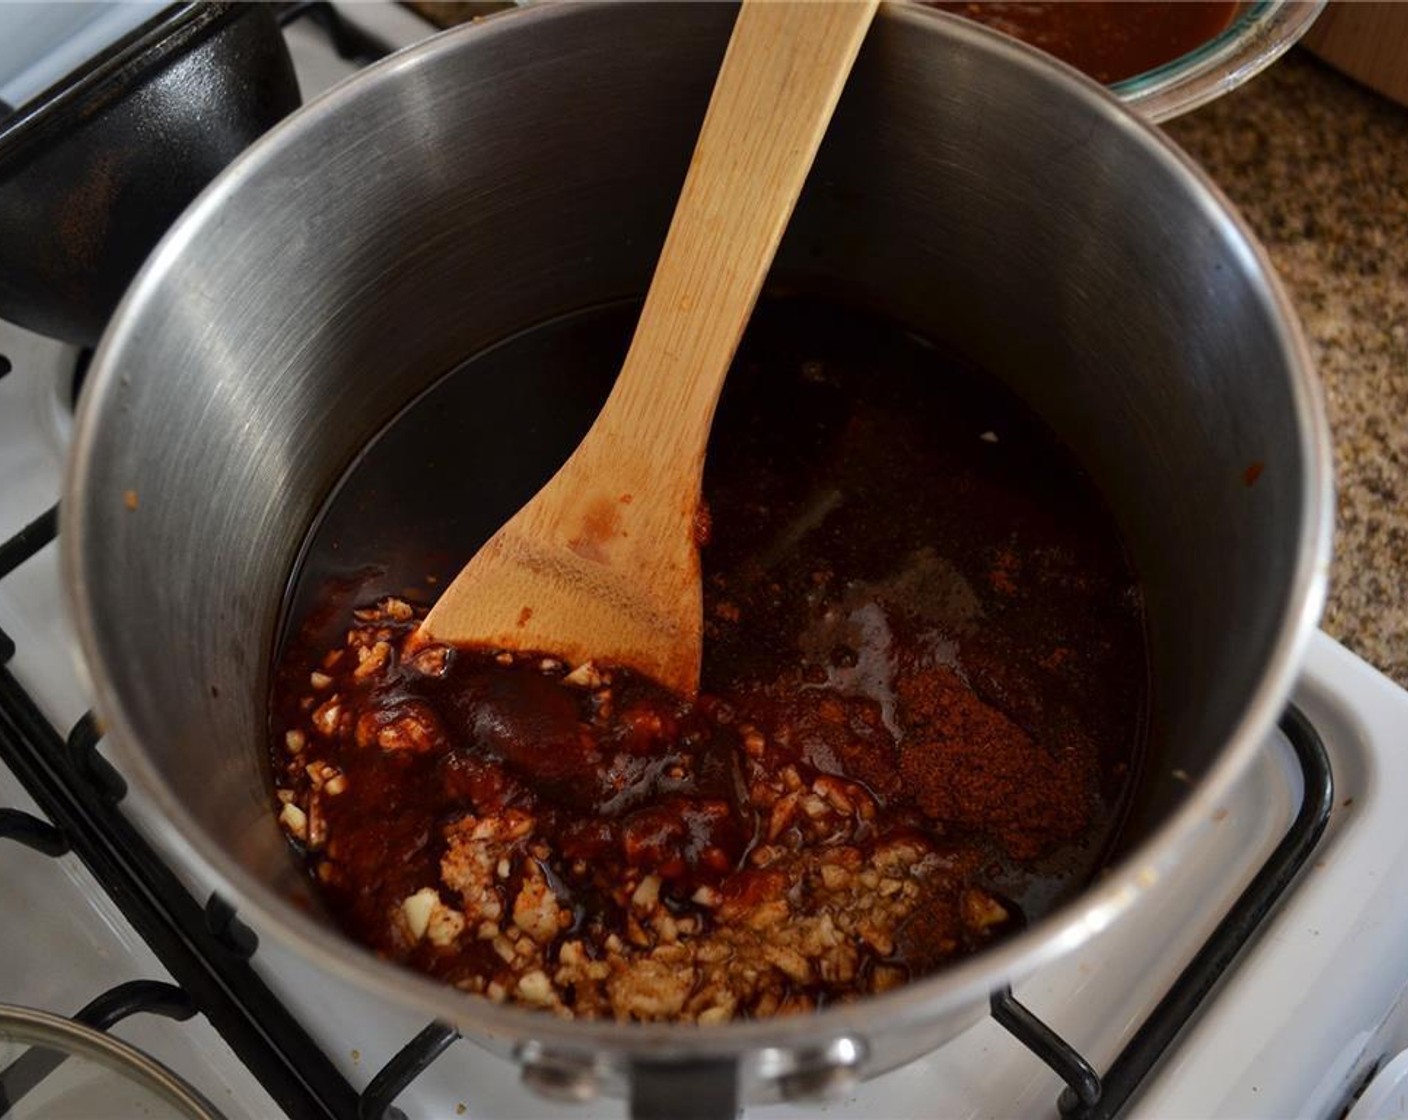 step 2 Combine Ketchup (2 cups), Balsamic Vinegar (1/2 cup), Cane Syrup (1/4 cup), juice from Lemon (1), Garlic (1/4 clove), Soy Sauce (1 Tbsp), Worcestershire Sauce (1/4 cup), Creole Seasoning (1/2 Tbsp), and Cayenne Pepper (1/2 Tbsp) in a 2 quart saucepan.